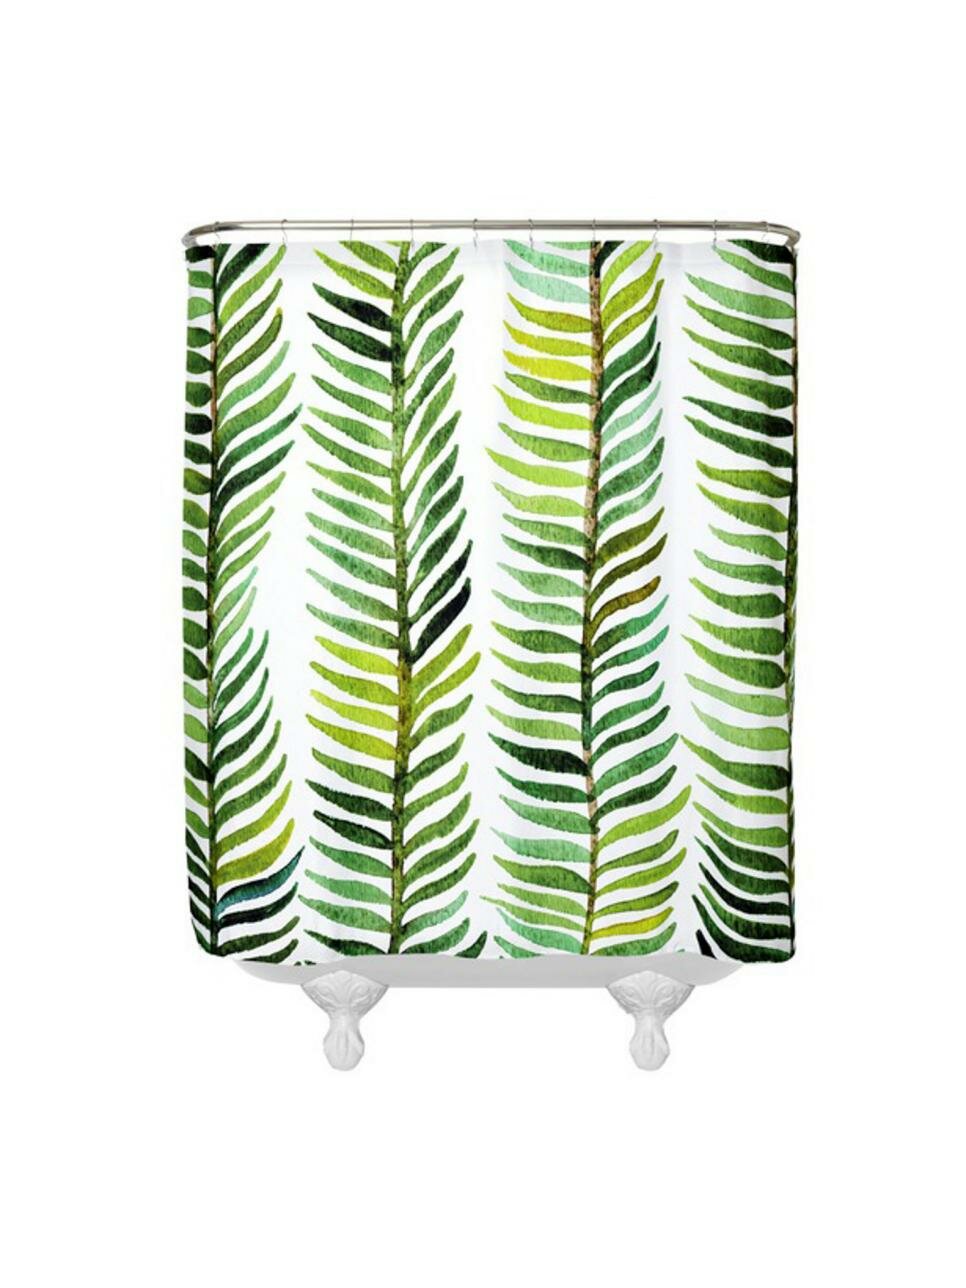 Ikea Shower Curtain for Best Your Bathroom Decoration: Shower Curtain Liner | Ikea Shower Curtain | Bathroom Curtain Rods